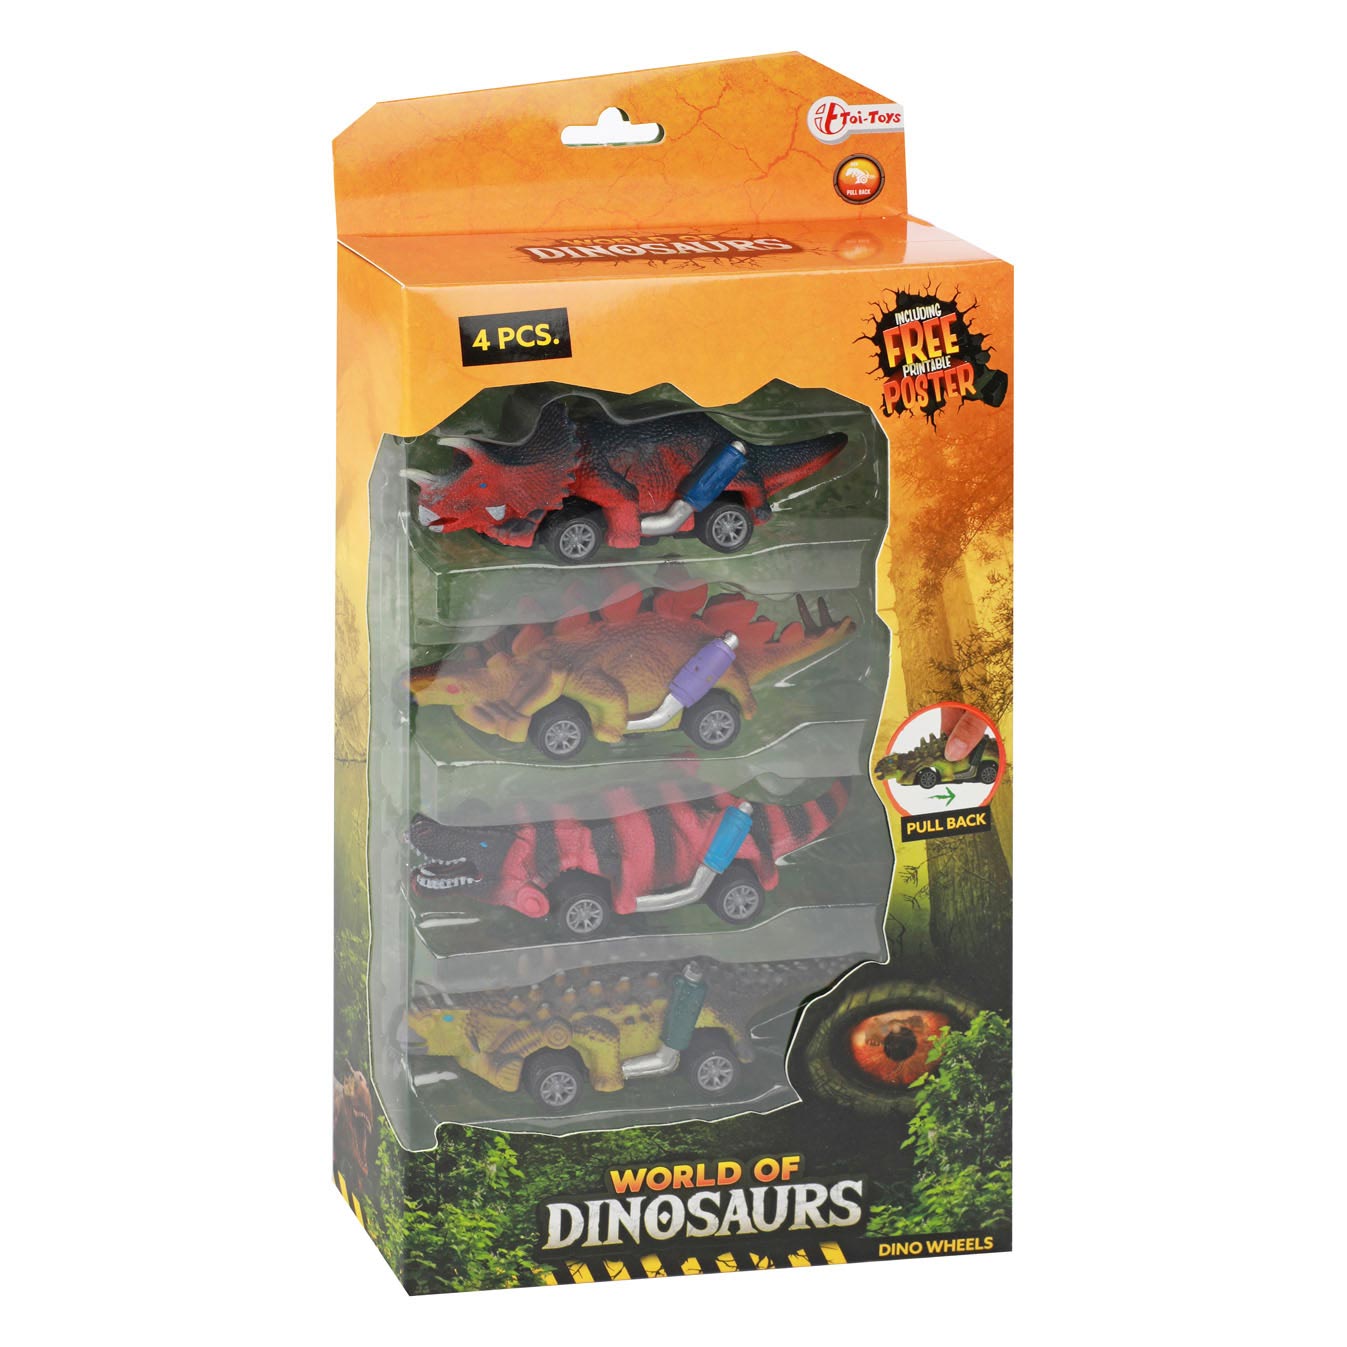 Voiture à traction Dino World of Dinosaurs , 4 pcs.